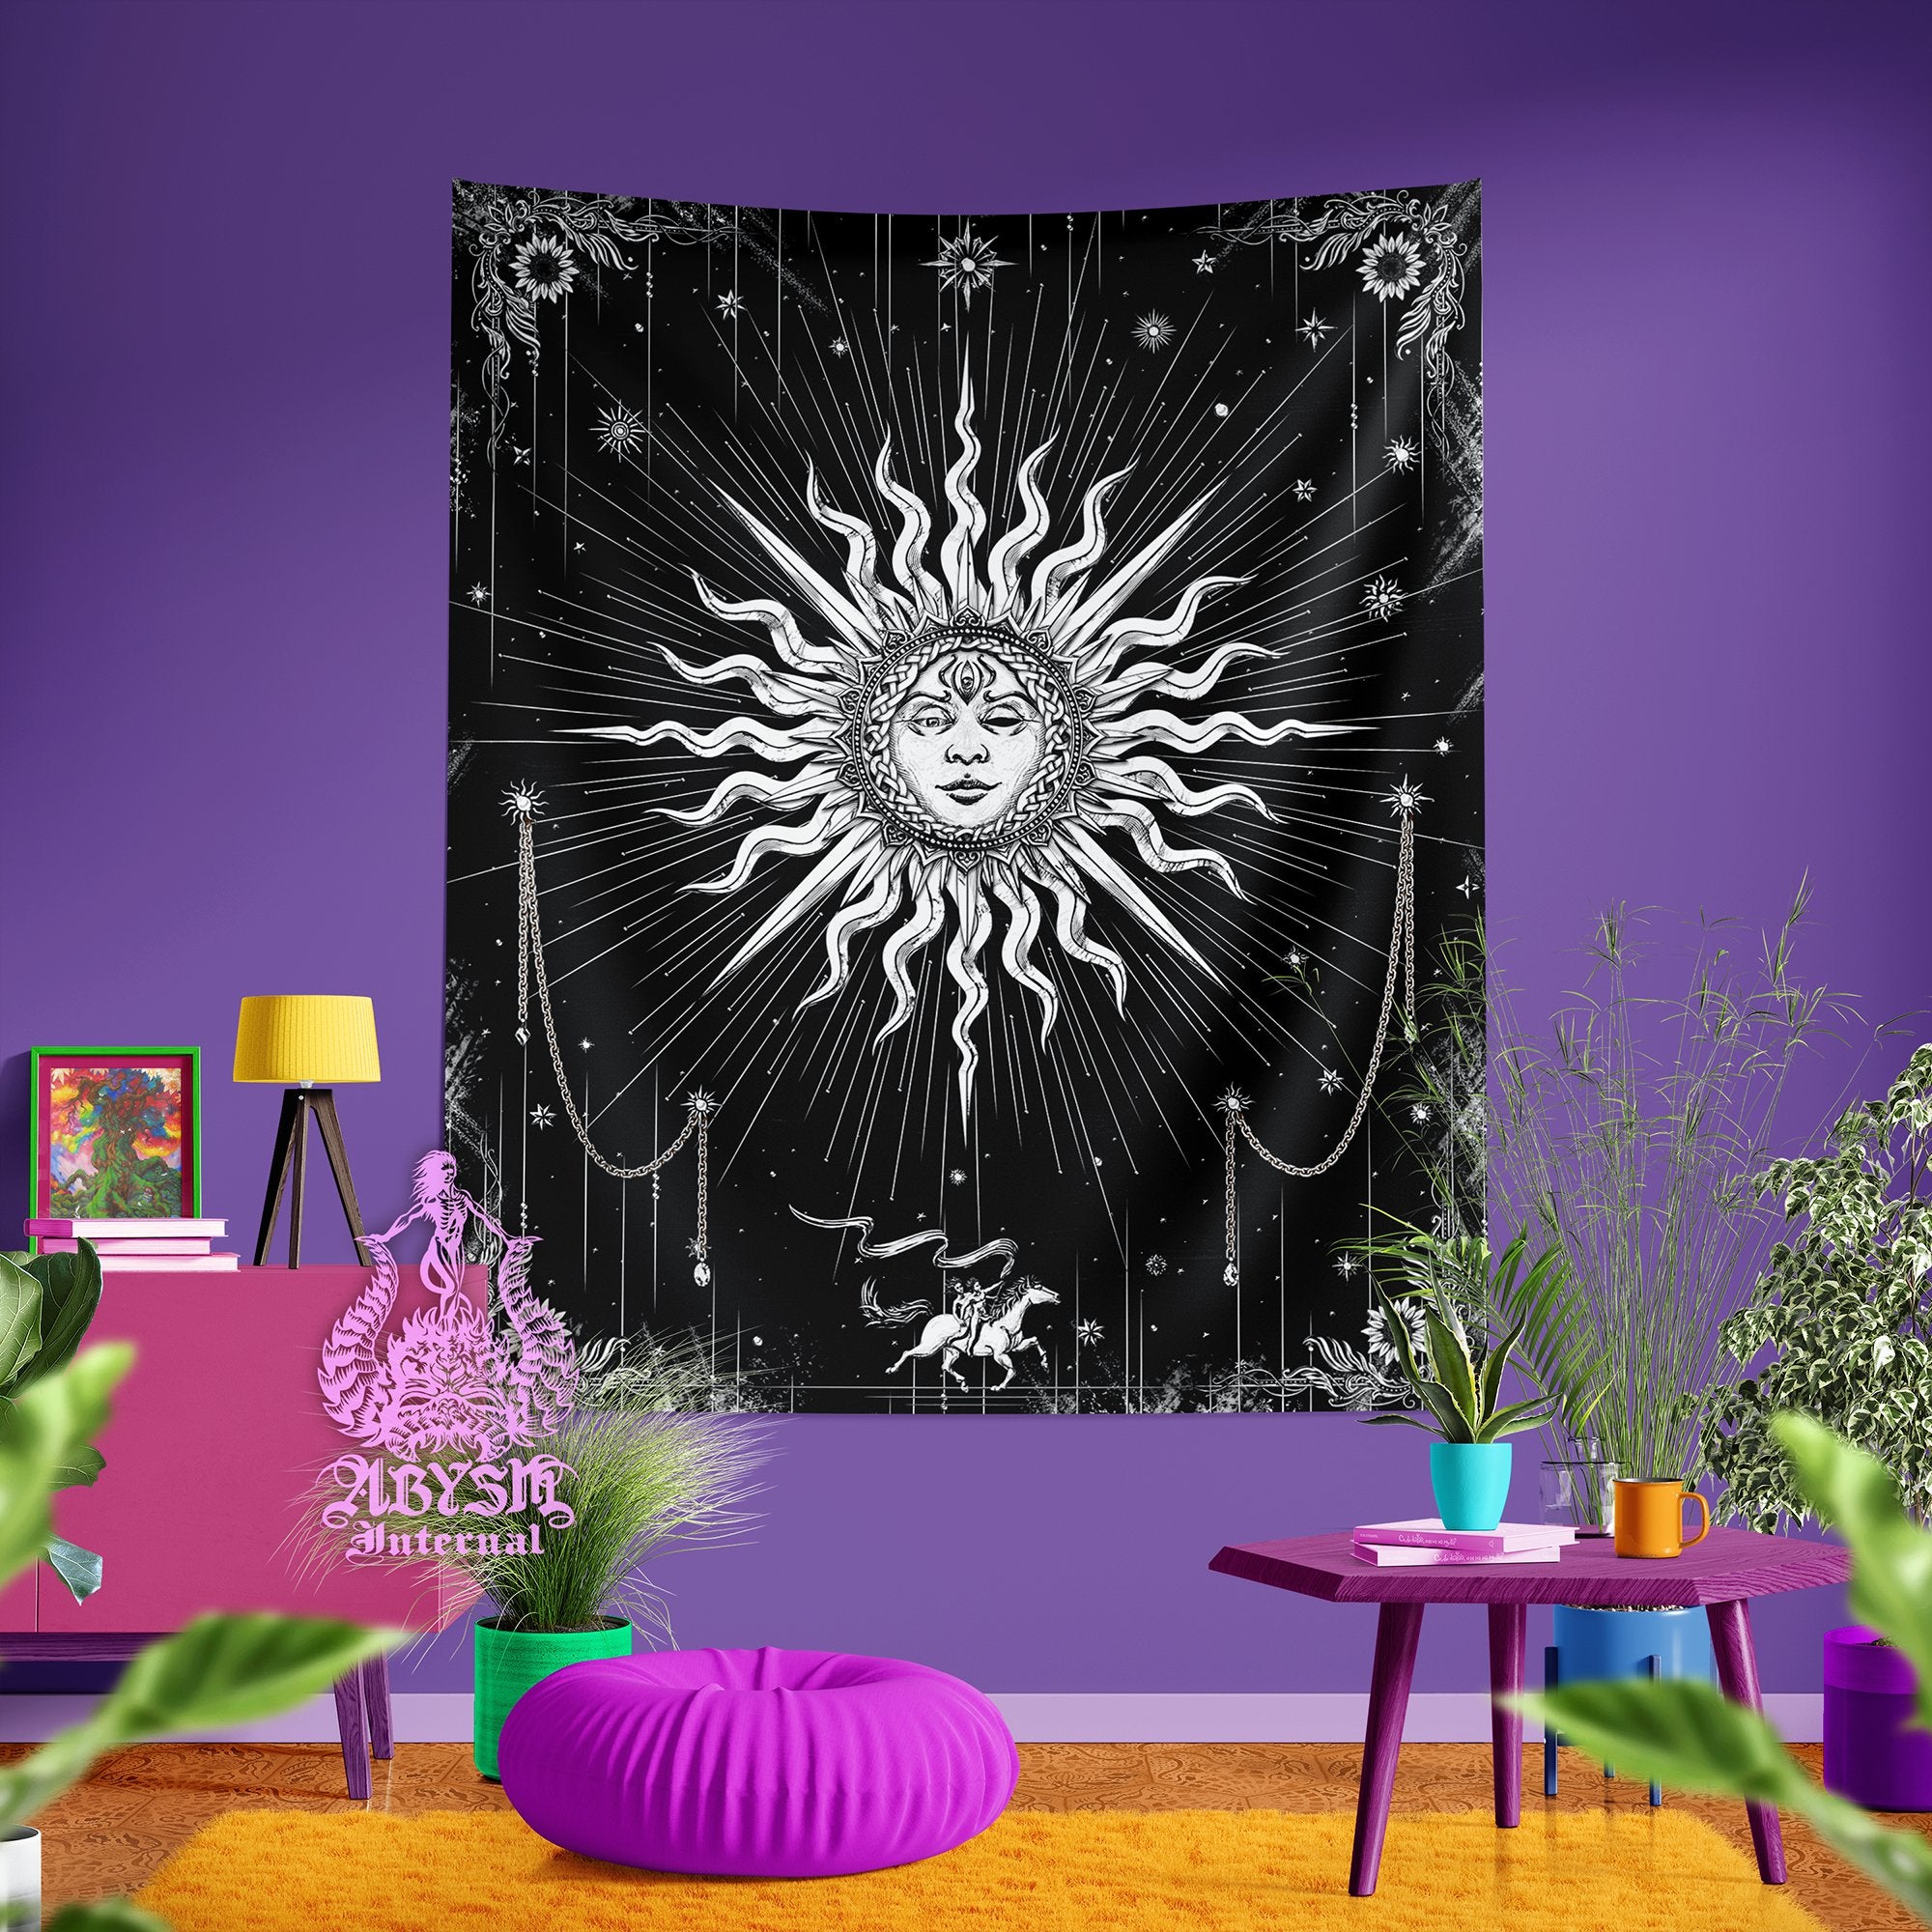 White Sun Tapestry, Tarot Card Arcana Wall Hanging, Esoteric and Magic Art, Indie and Boho Home Decor, Vertical Print - Paper, 6 Colors - Abysm Internal